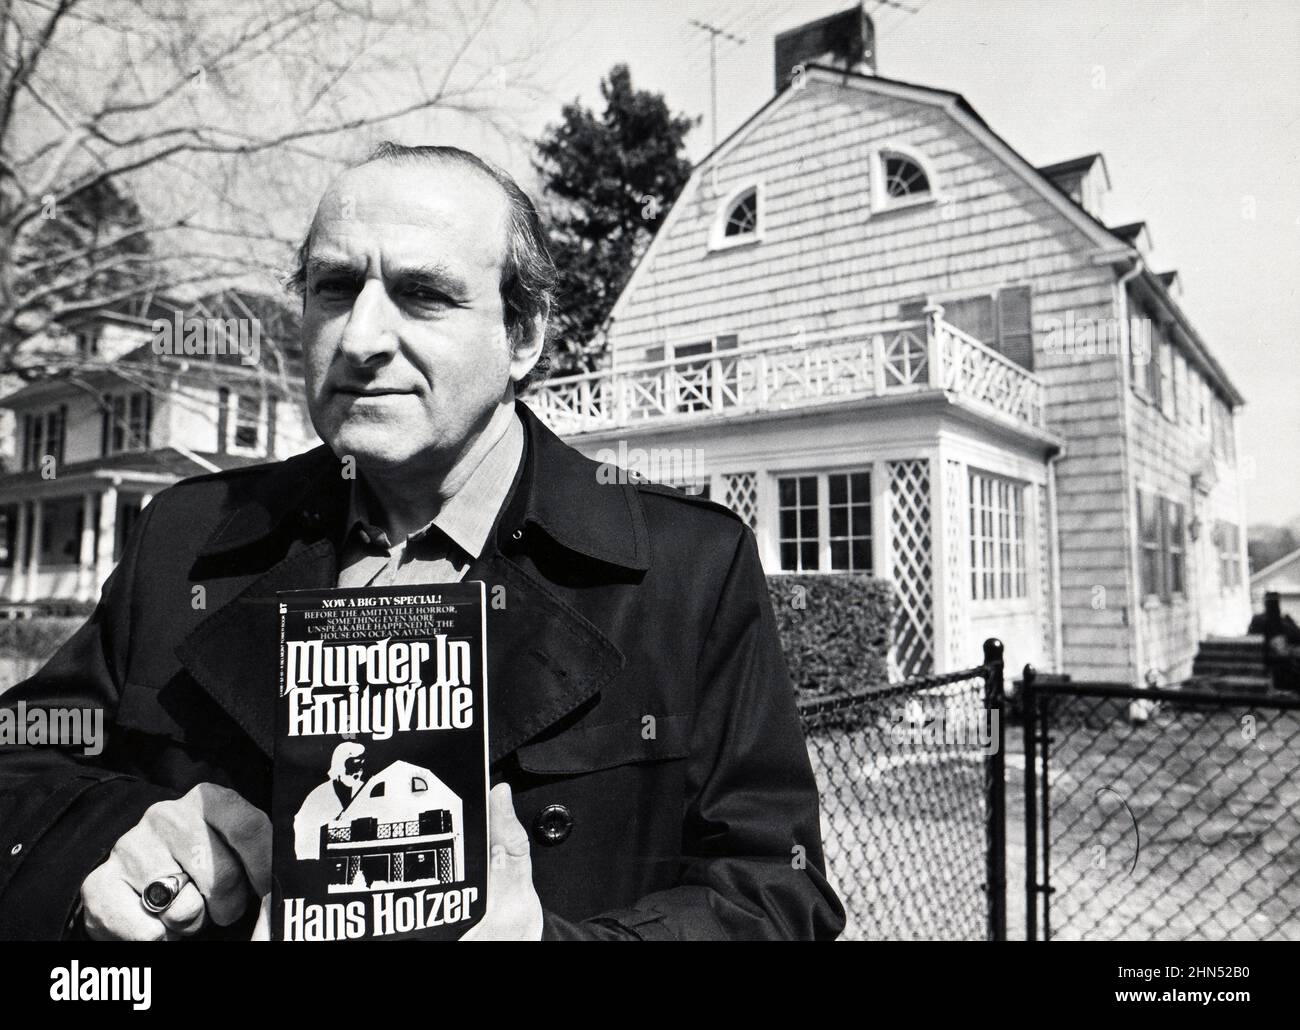 Posed portrait of the late Austrian American author and Parapsychologist Hans Holzer in front of the infamous Amityville Horror House. He investigated the paranormal, ghosts & haunted houses. His book debunked the claims in the popular 1979 move, 'The Amityville Horror.' In Amityville, Long Island, 1980. Stock Photo